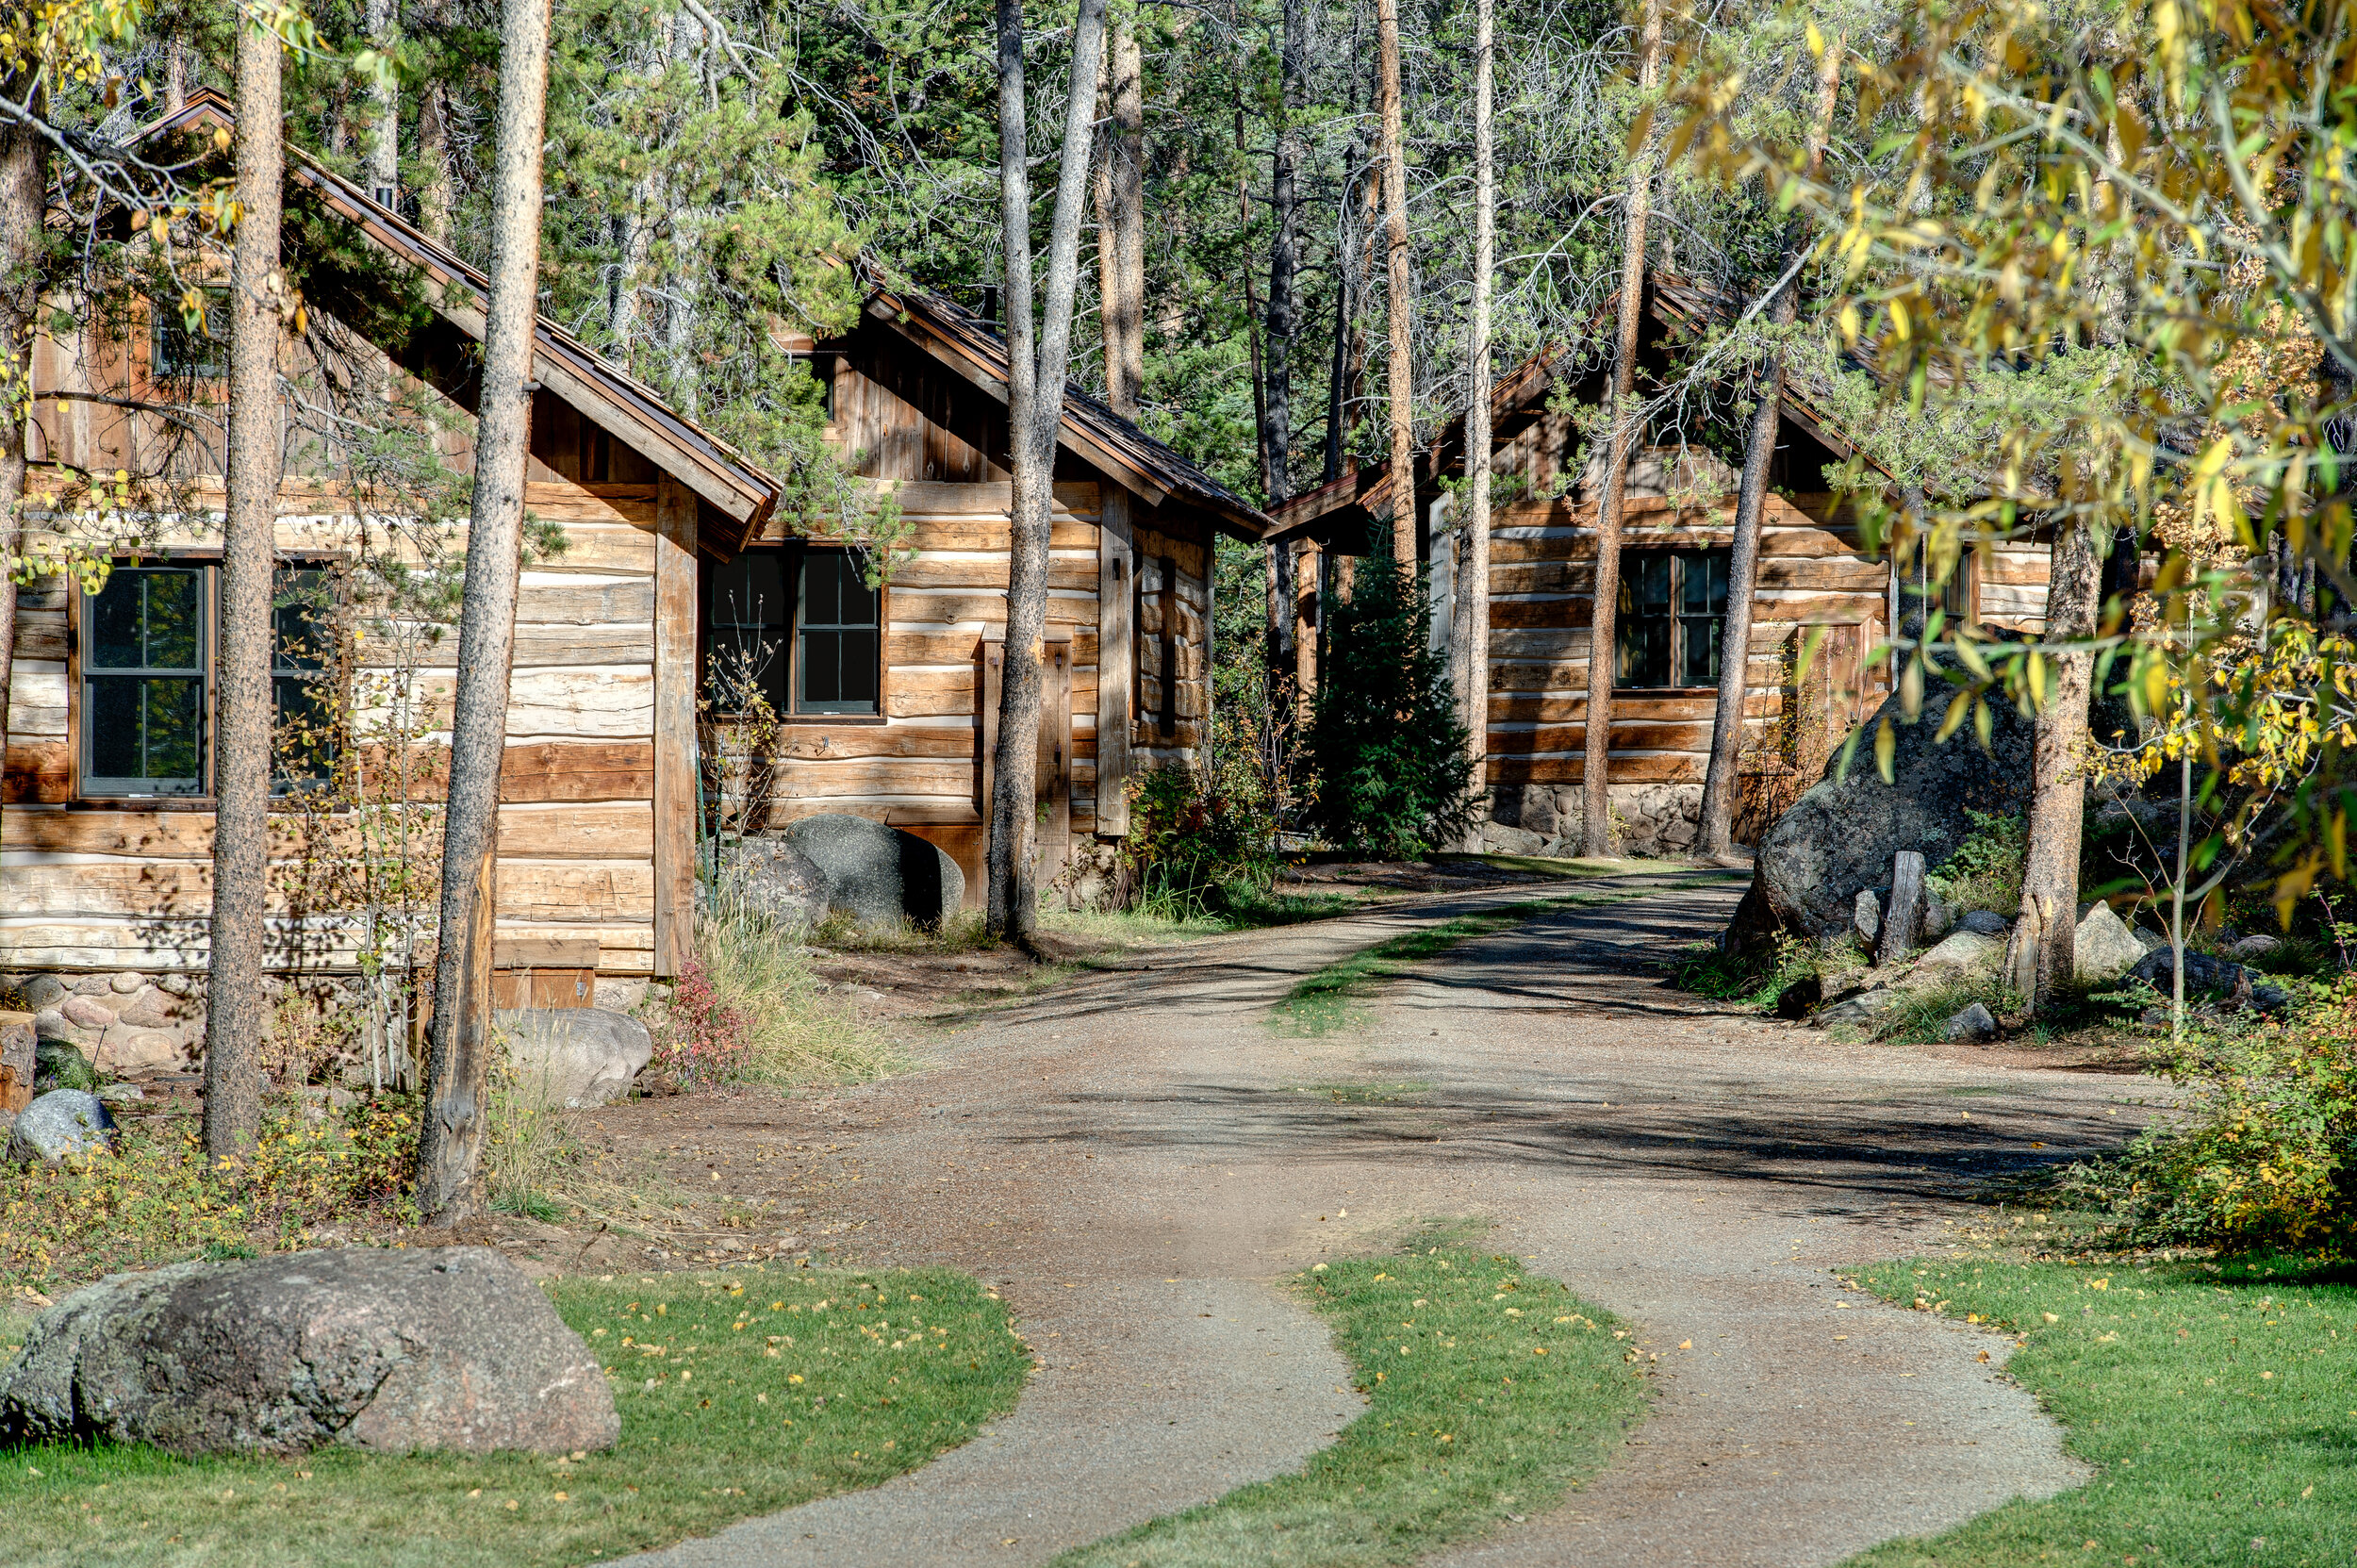   Cabins at Taylor Ridge Lodge (photo credit: Eleven Experience)  